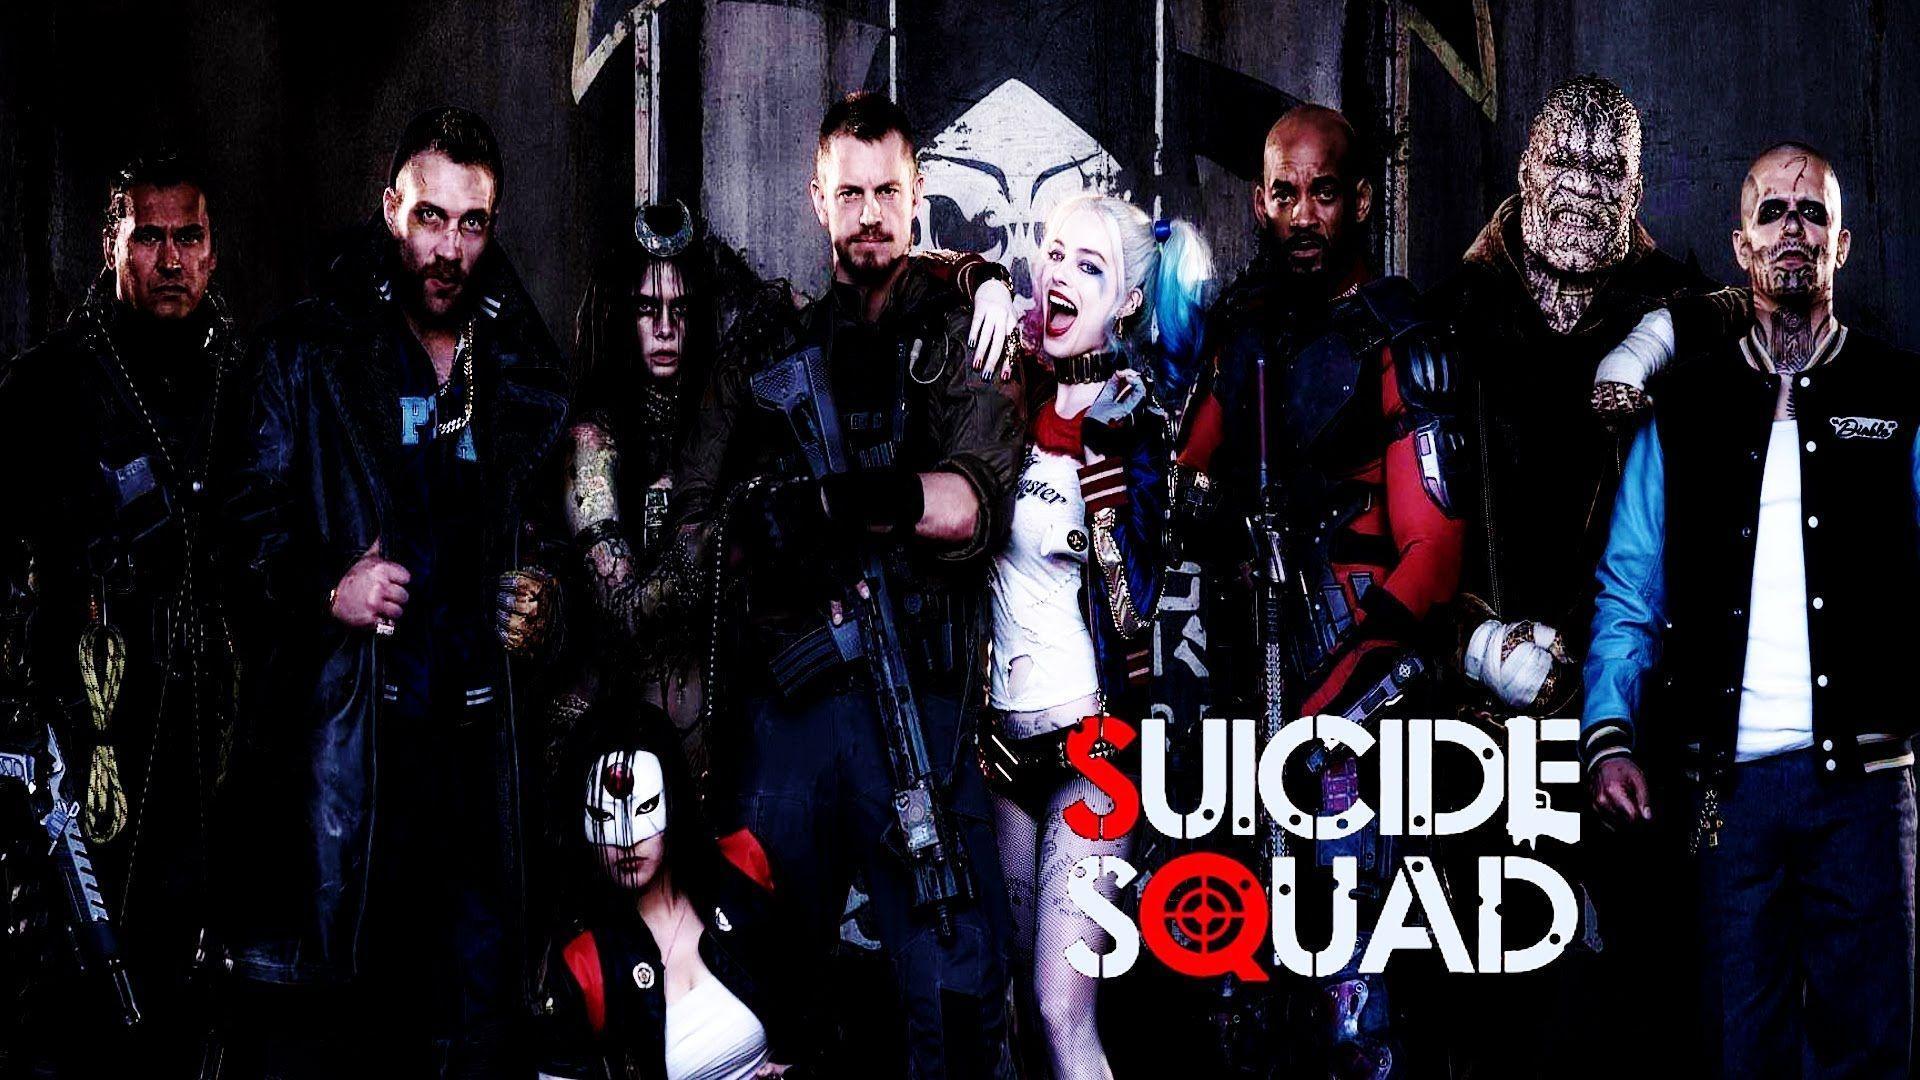 Suicide Squad 2016 HD wallpaper free download